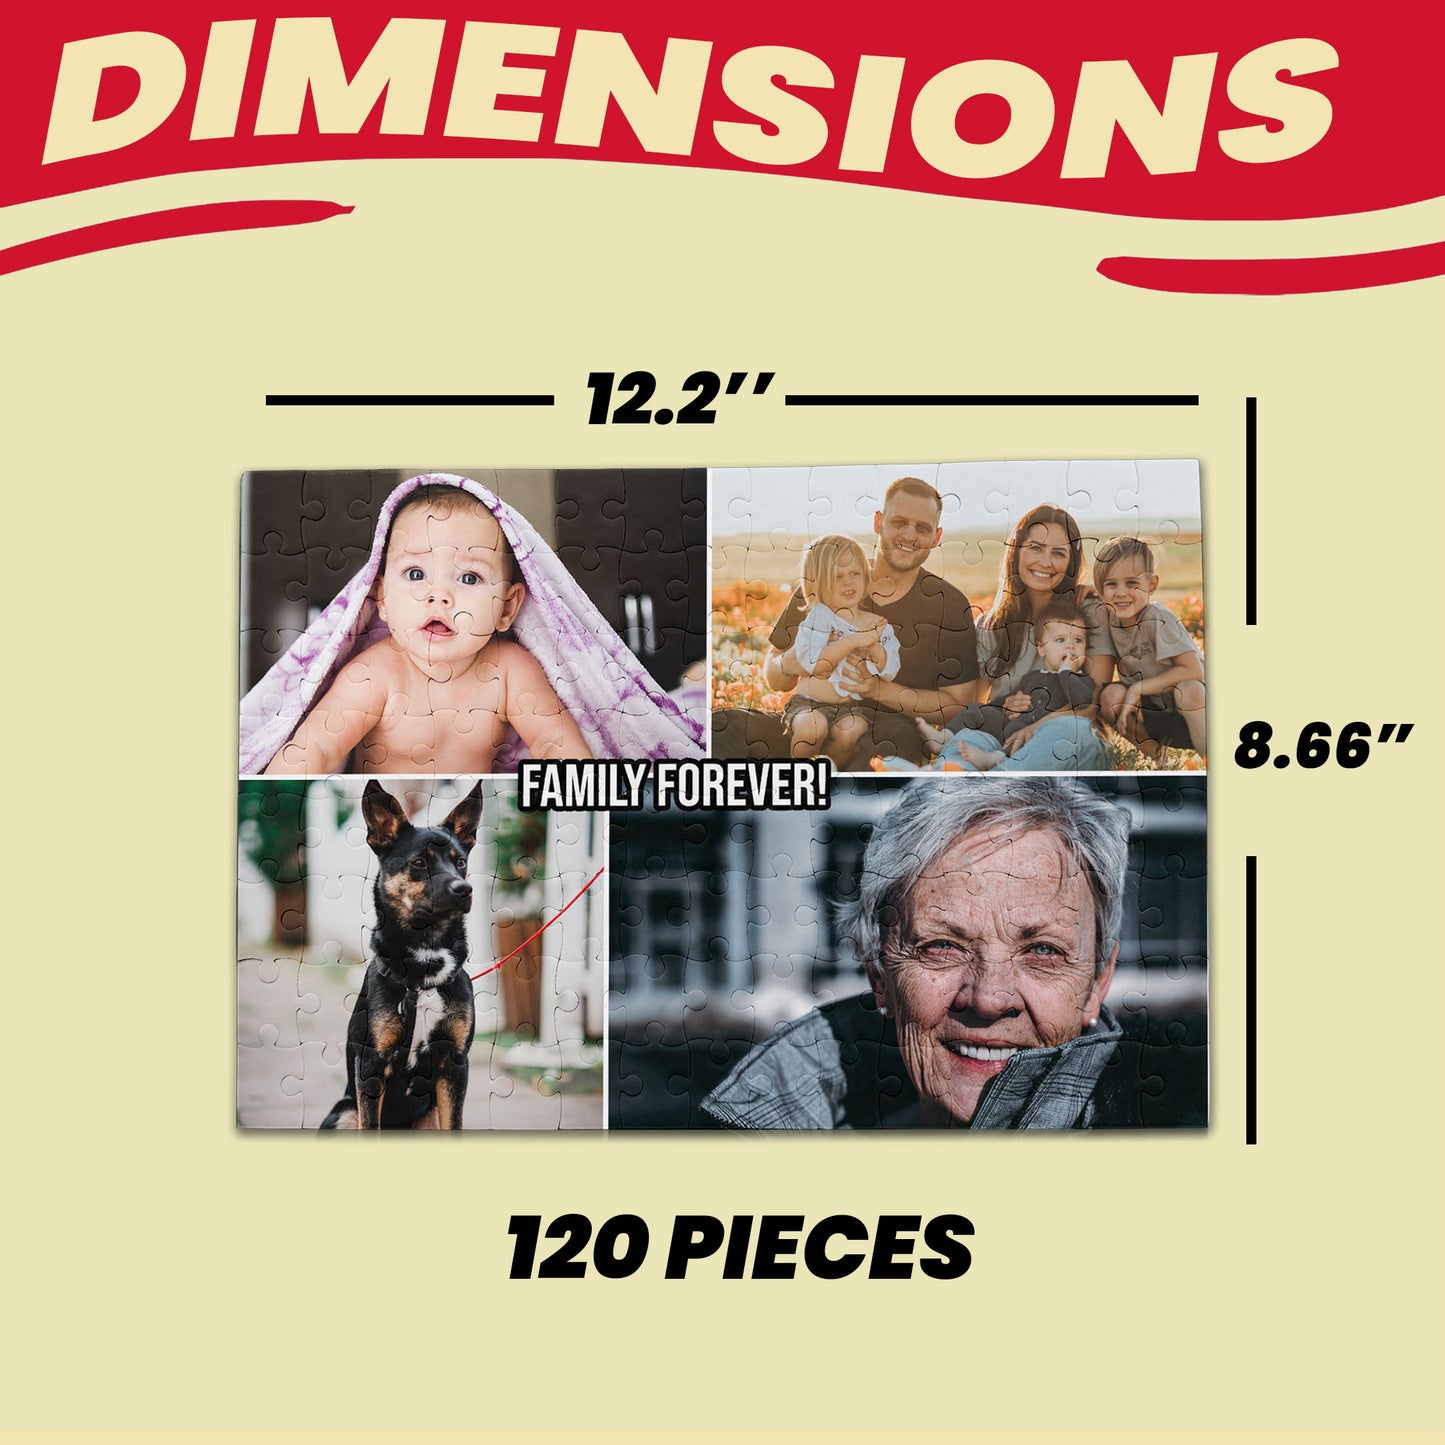 Custom Puzzles with Your Photo or Design